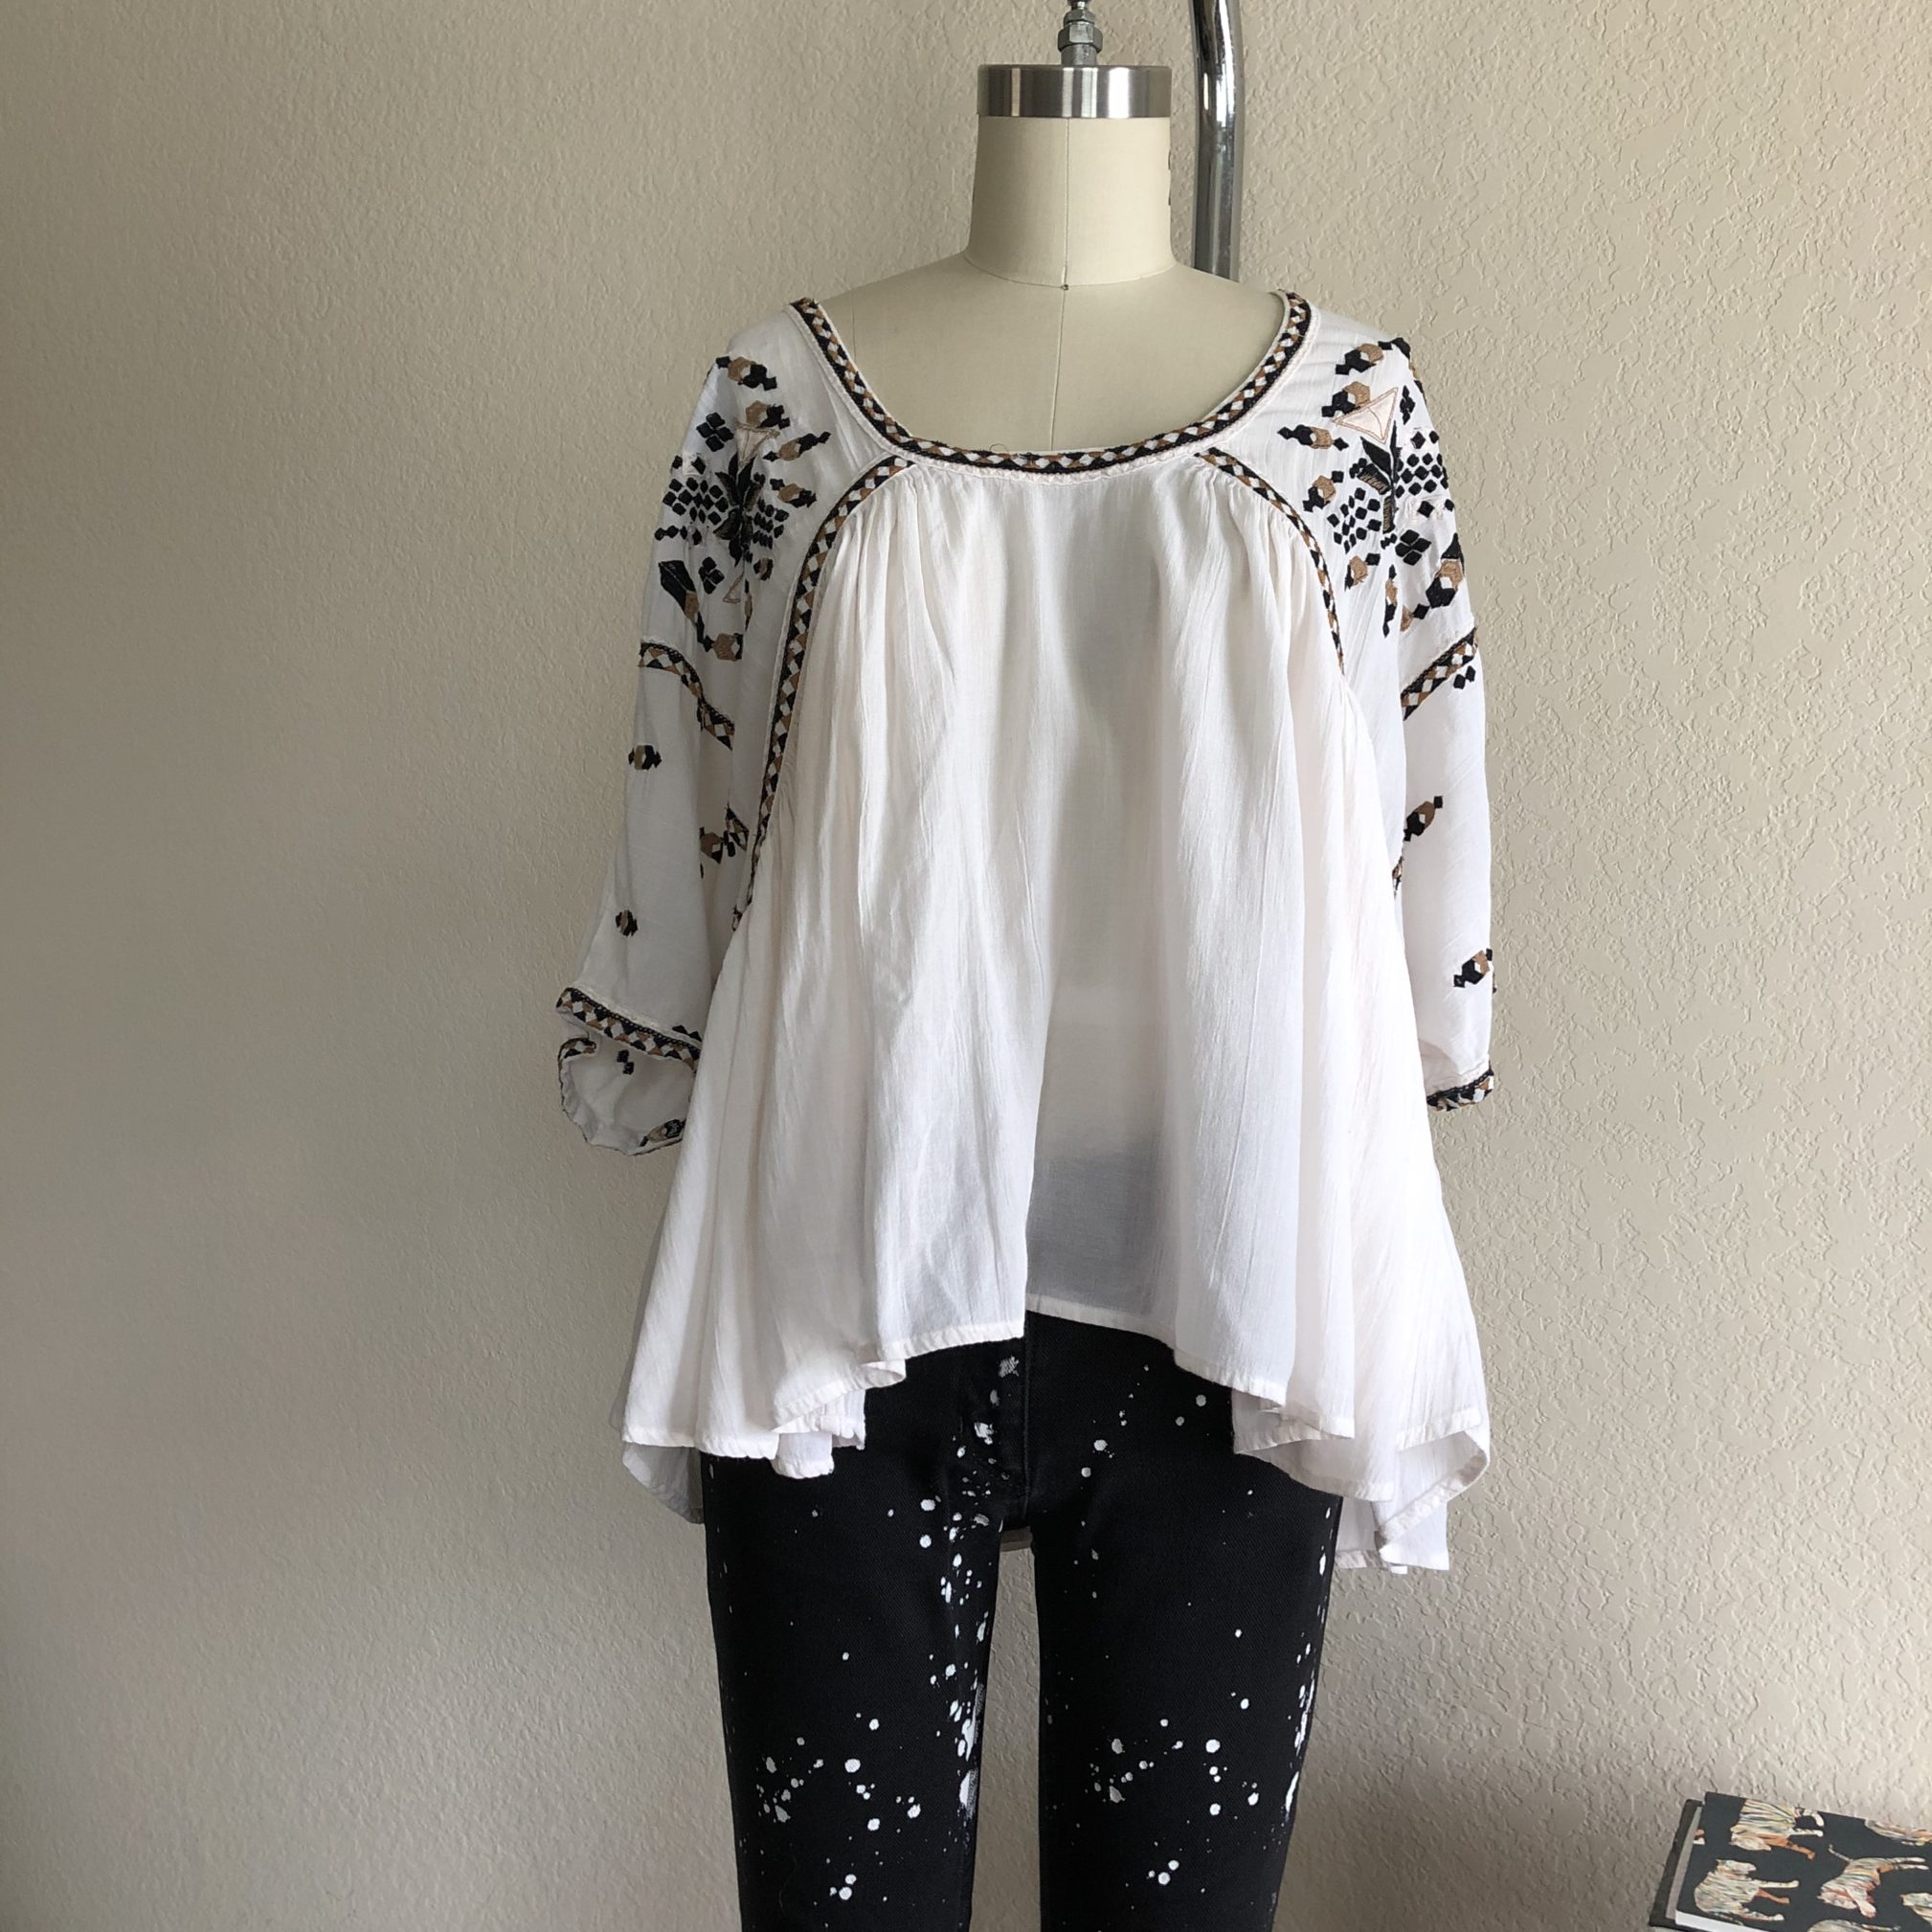 French Connection Woodstock Stitch Blouse - Costume Baldor